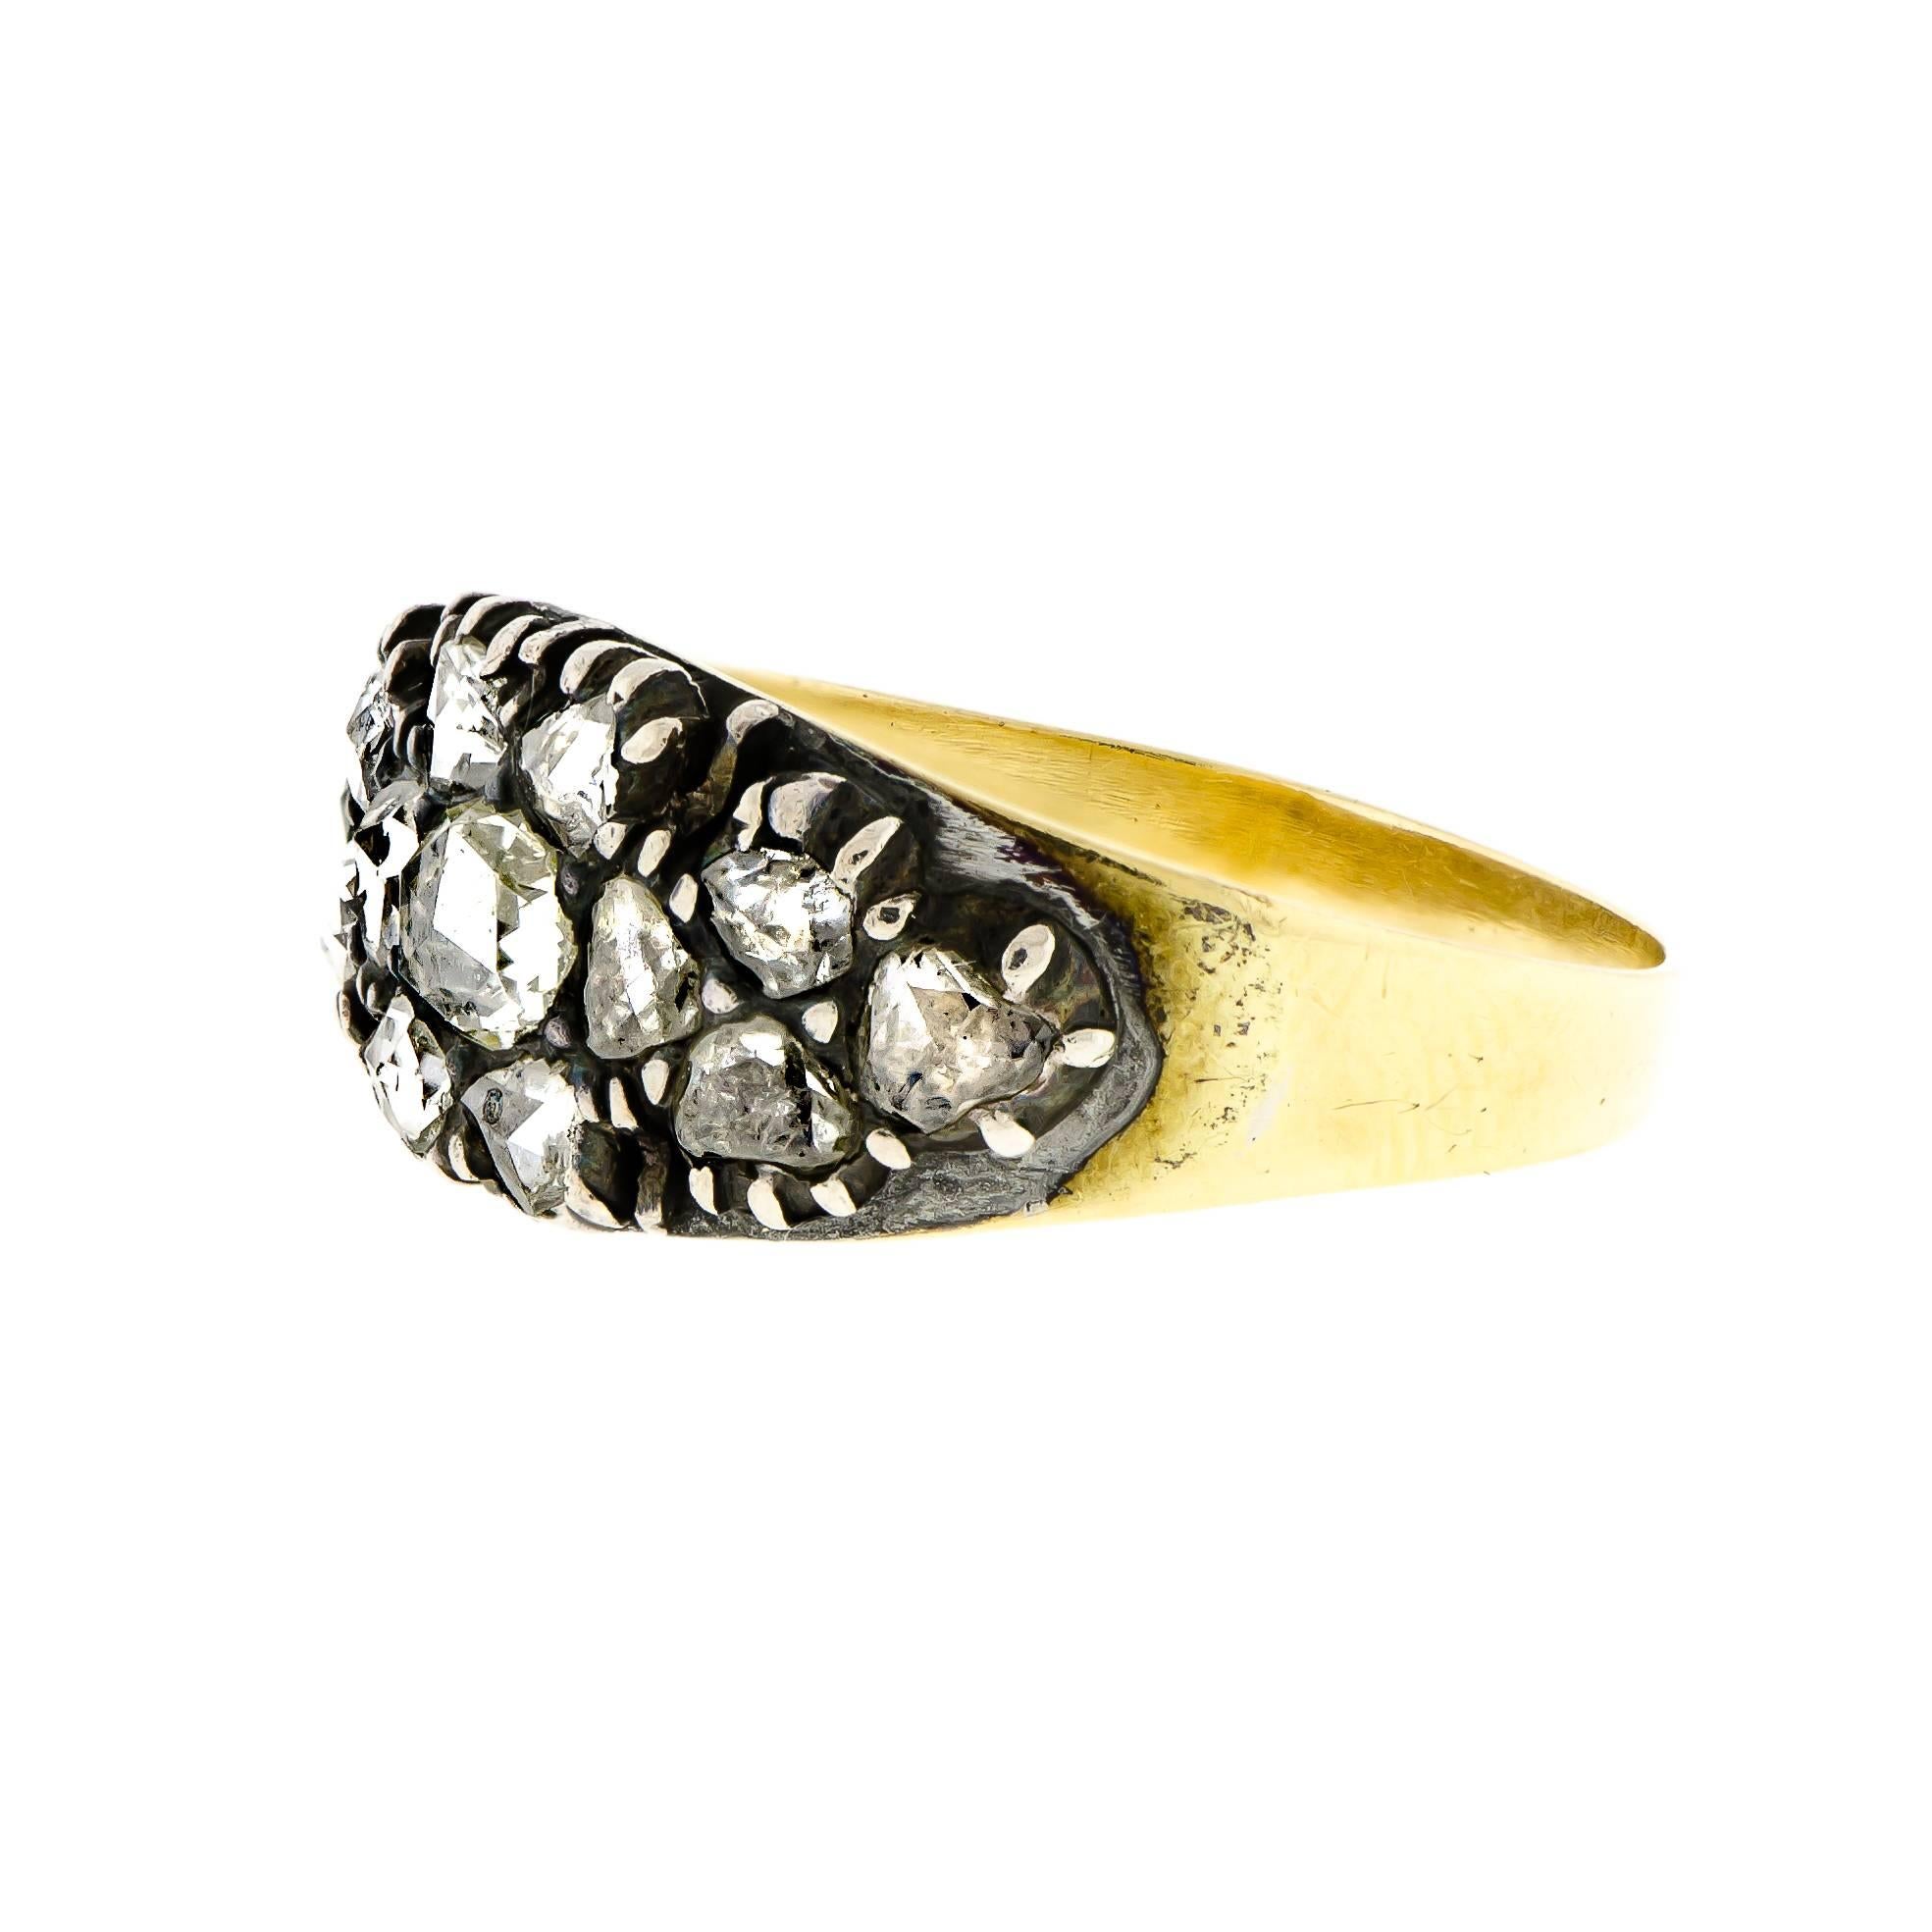 Early Victorian antique silver topped yellow gold rosecut diamond ring consiting of thirteen (13) prong set closed back mounting rosecut diamonds of varying sizes, chunky cuts set into a silver topped yellow gold band ring.